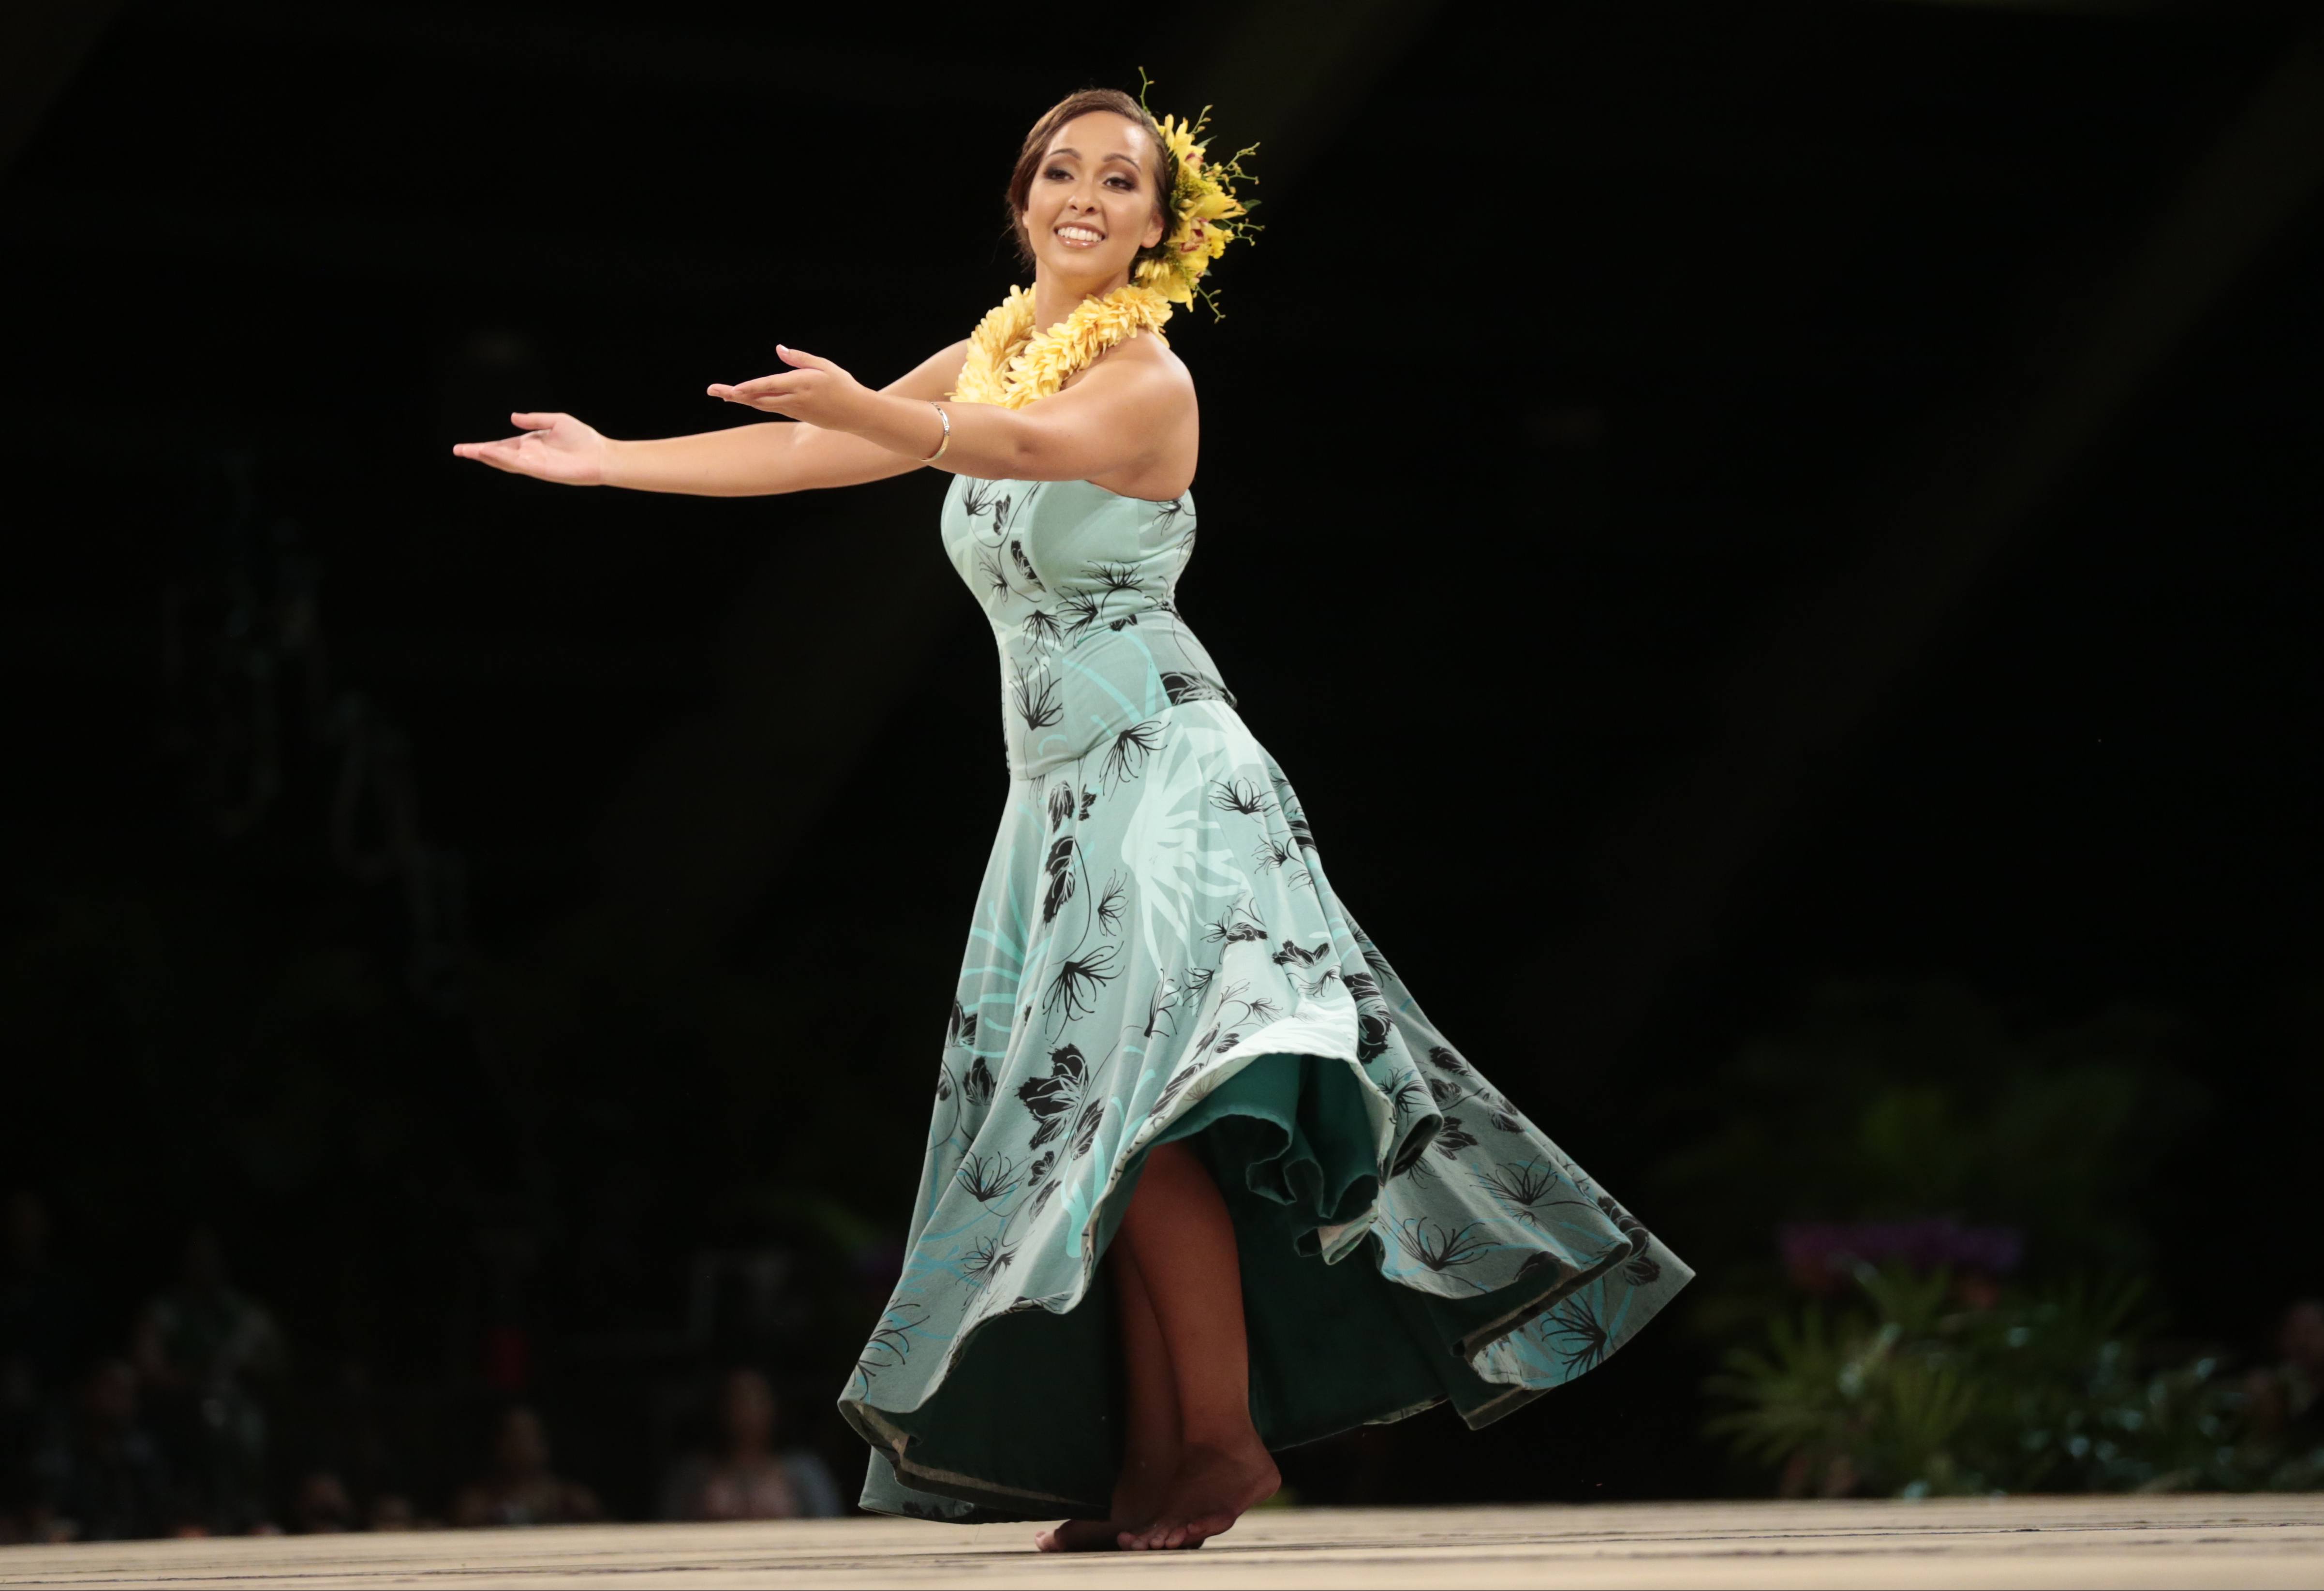 2017 Merrie Monarch's Miss Aloha Hula competition